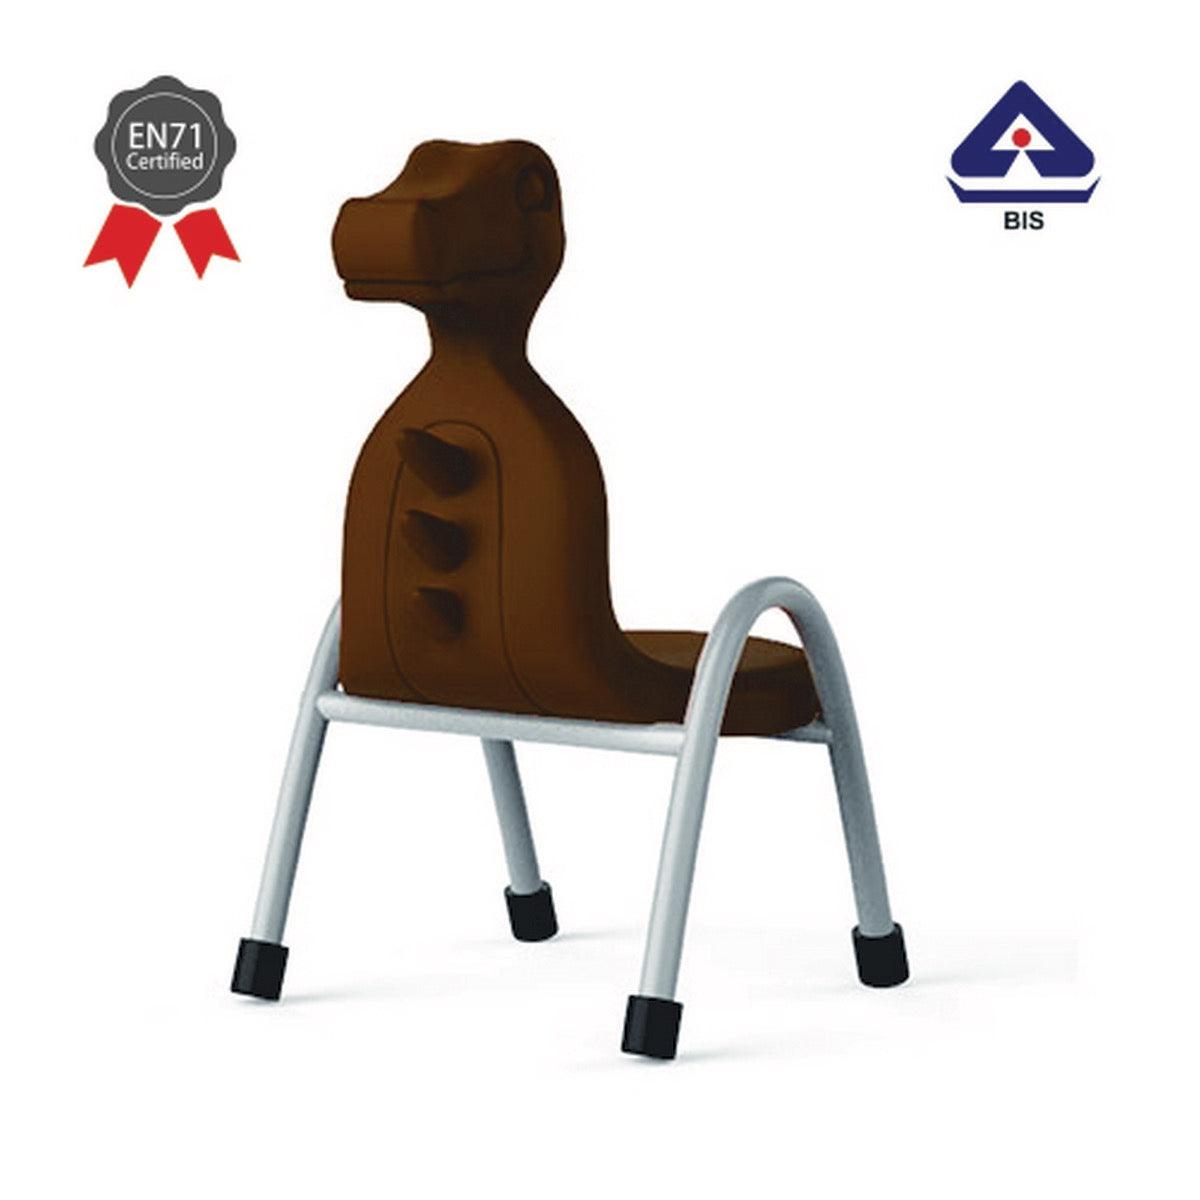 Ok Play Dino Chair, Study Chair, Sturdy And Durable Chair, Plastic Chair, Perfect For Home, Creches And School, Brown, 5 to 10 Years, Height 12 Inches